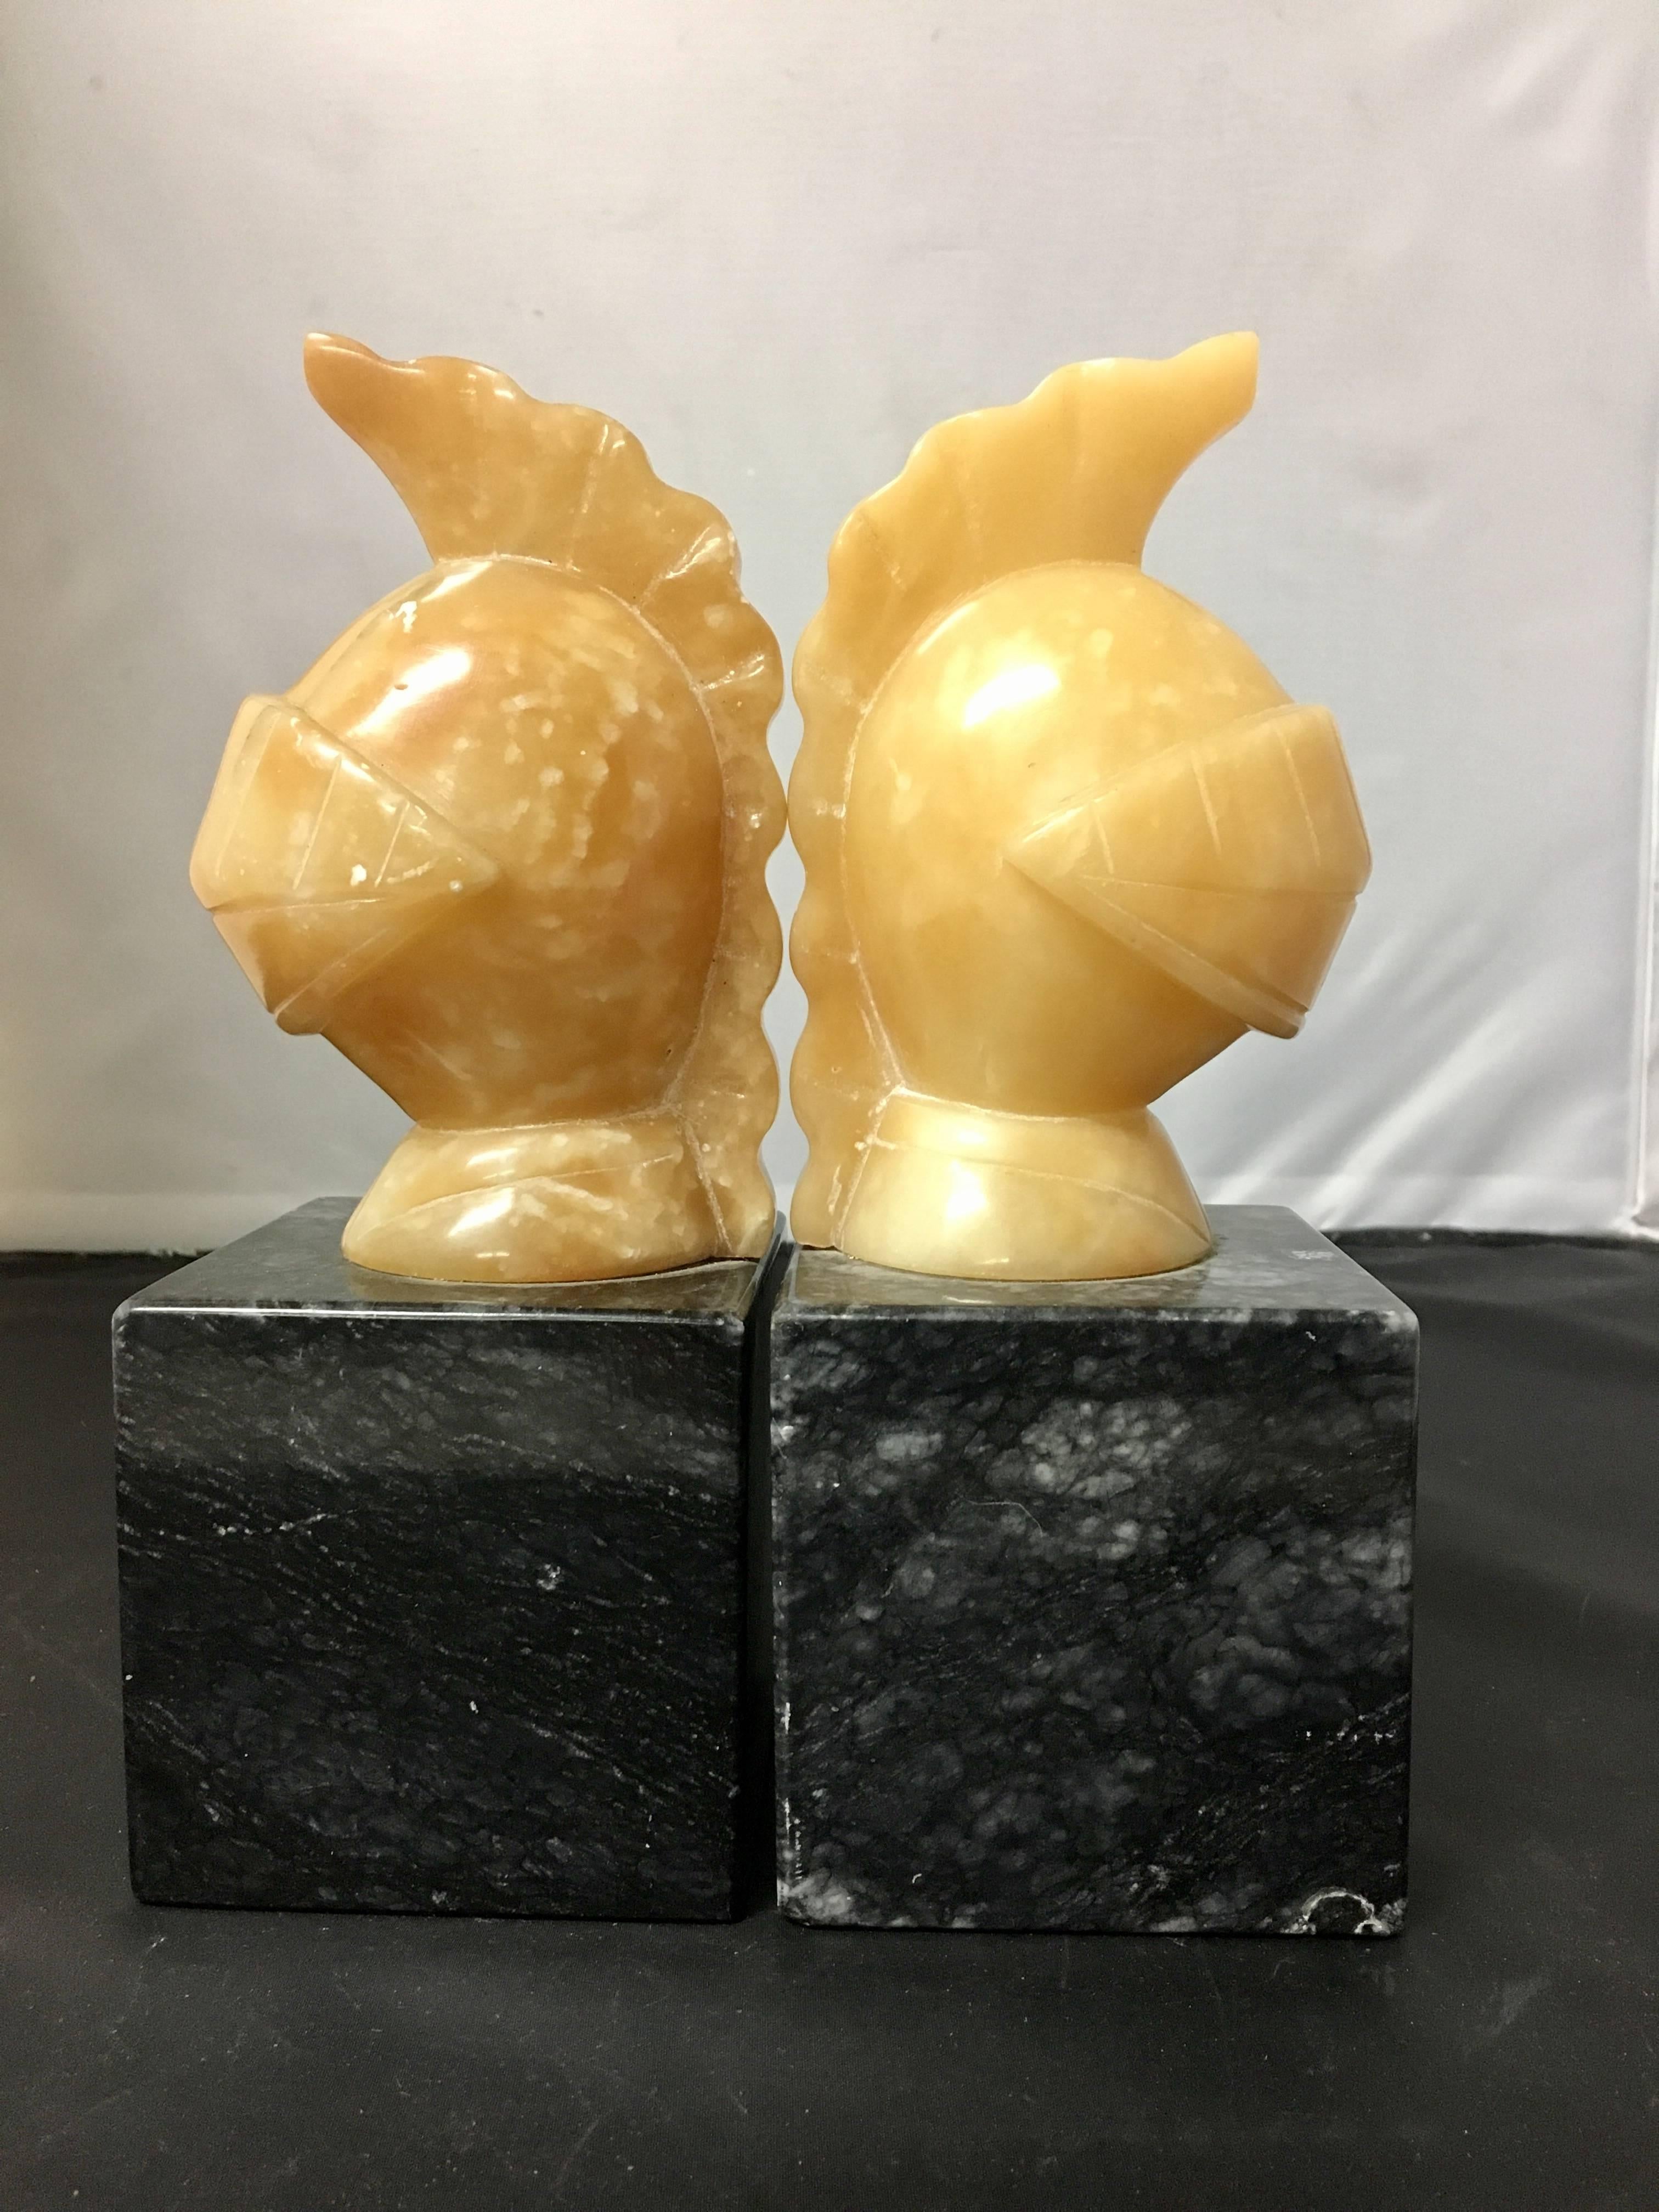 Elegant pair of Trojan helmet bookends made of cream alabaster on a solid black marble base, circa 1960s.